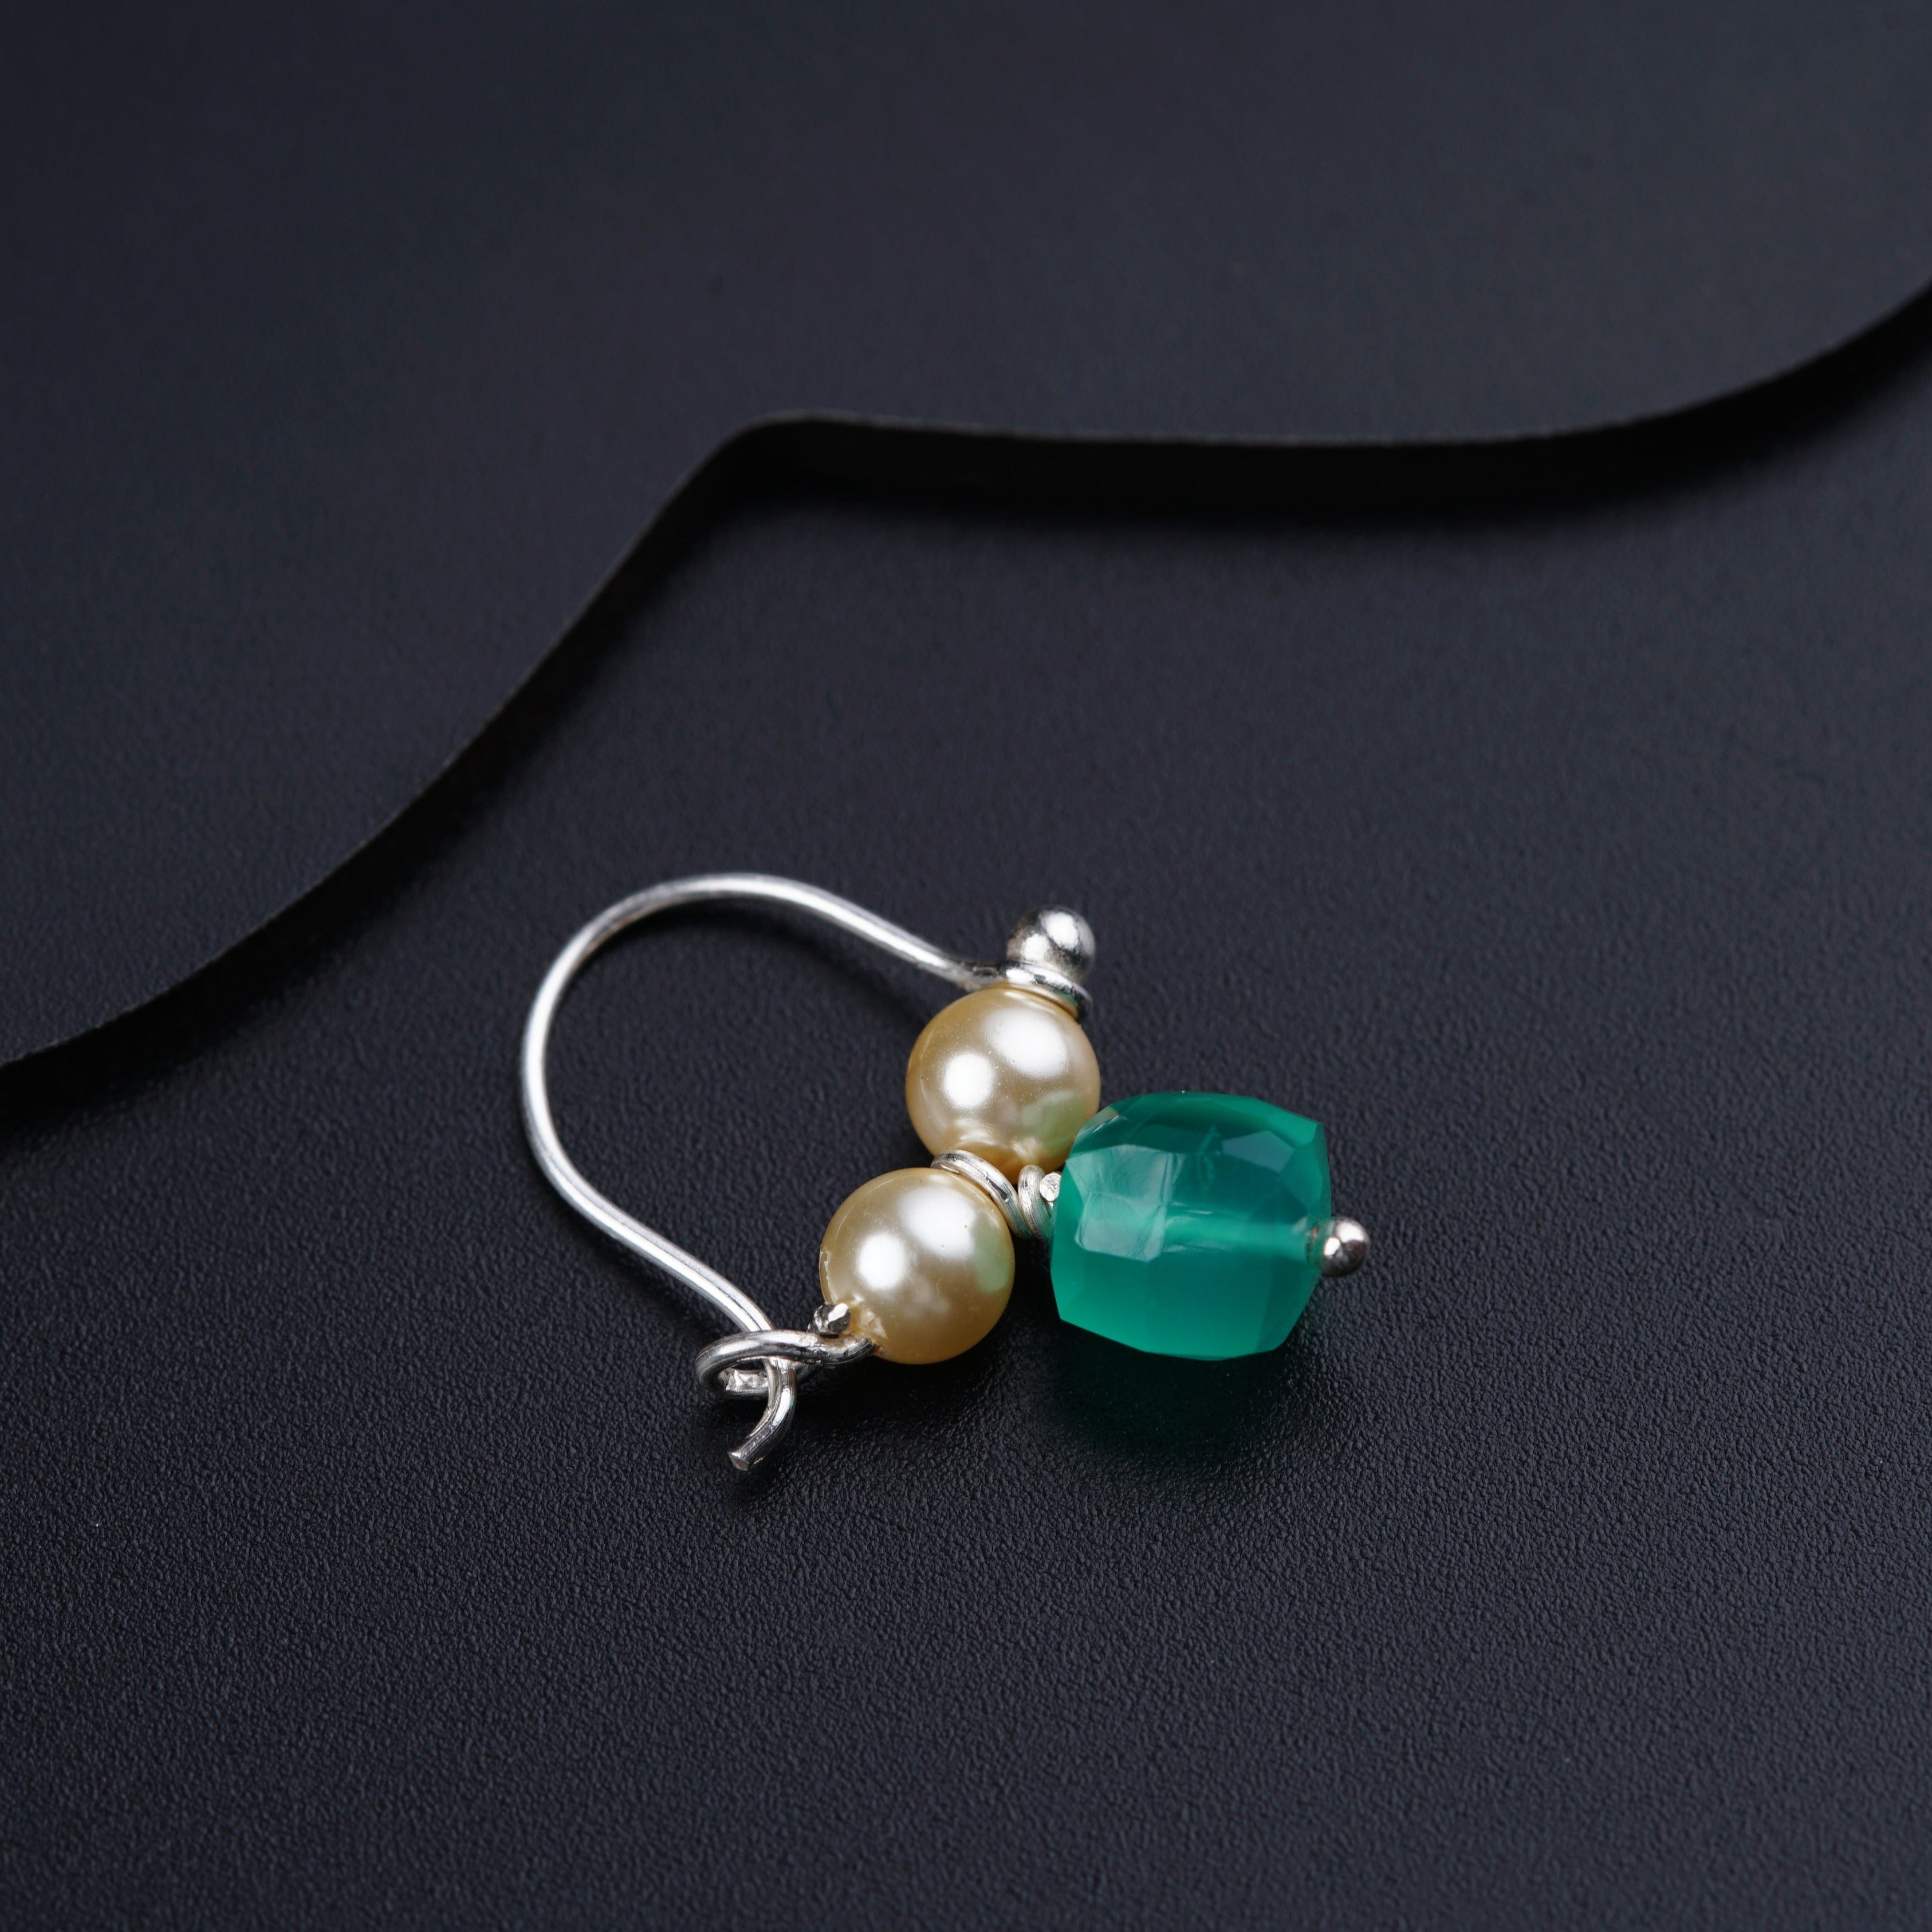 a pair of earrings with pearls and a green bead